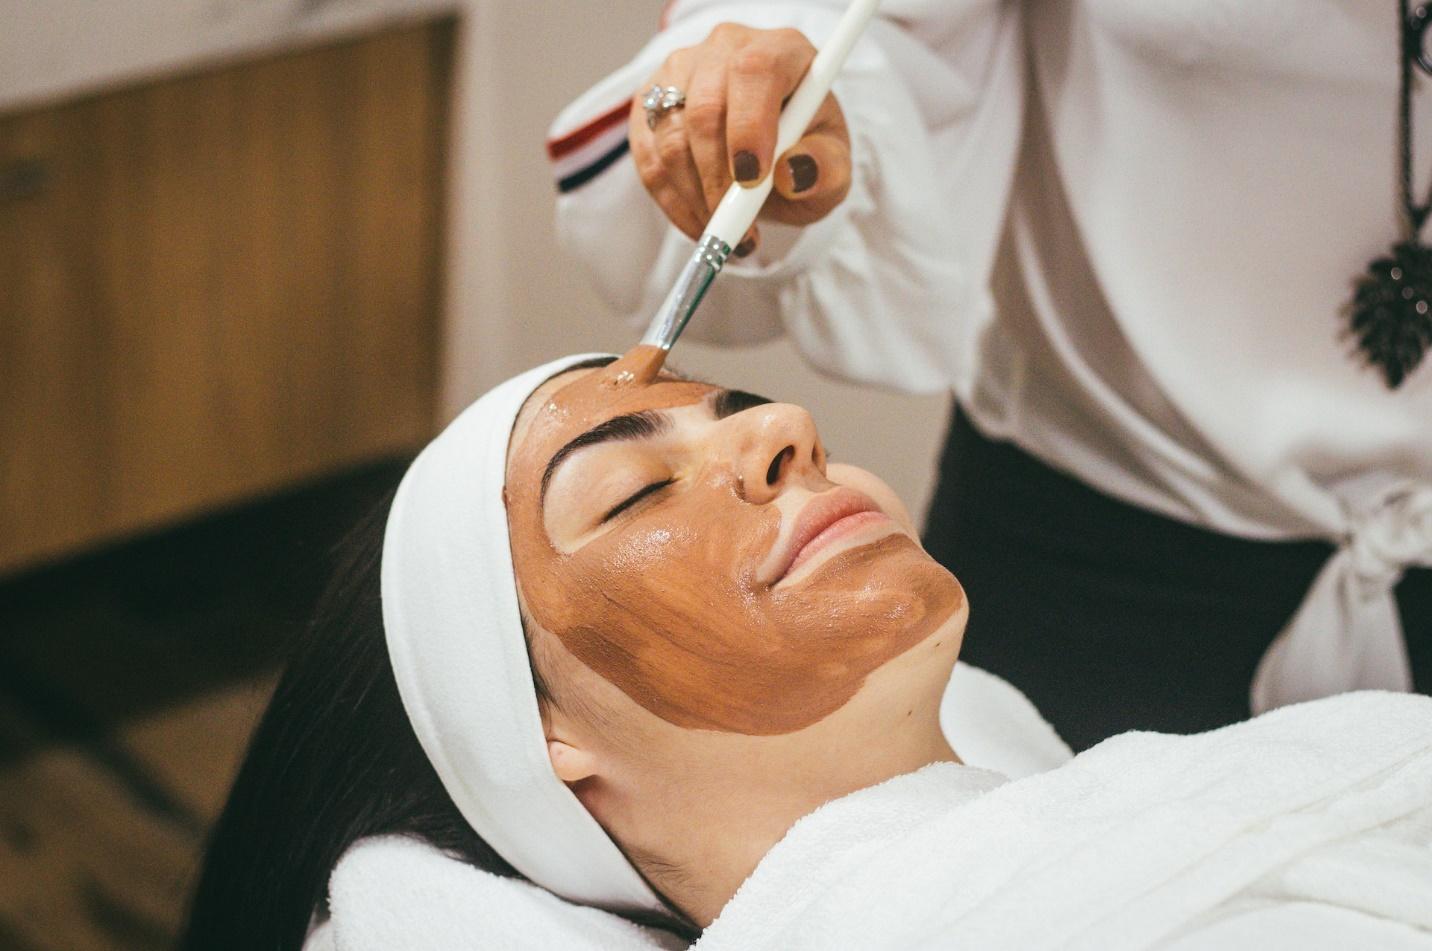 A skincare specialist working on a client